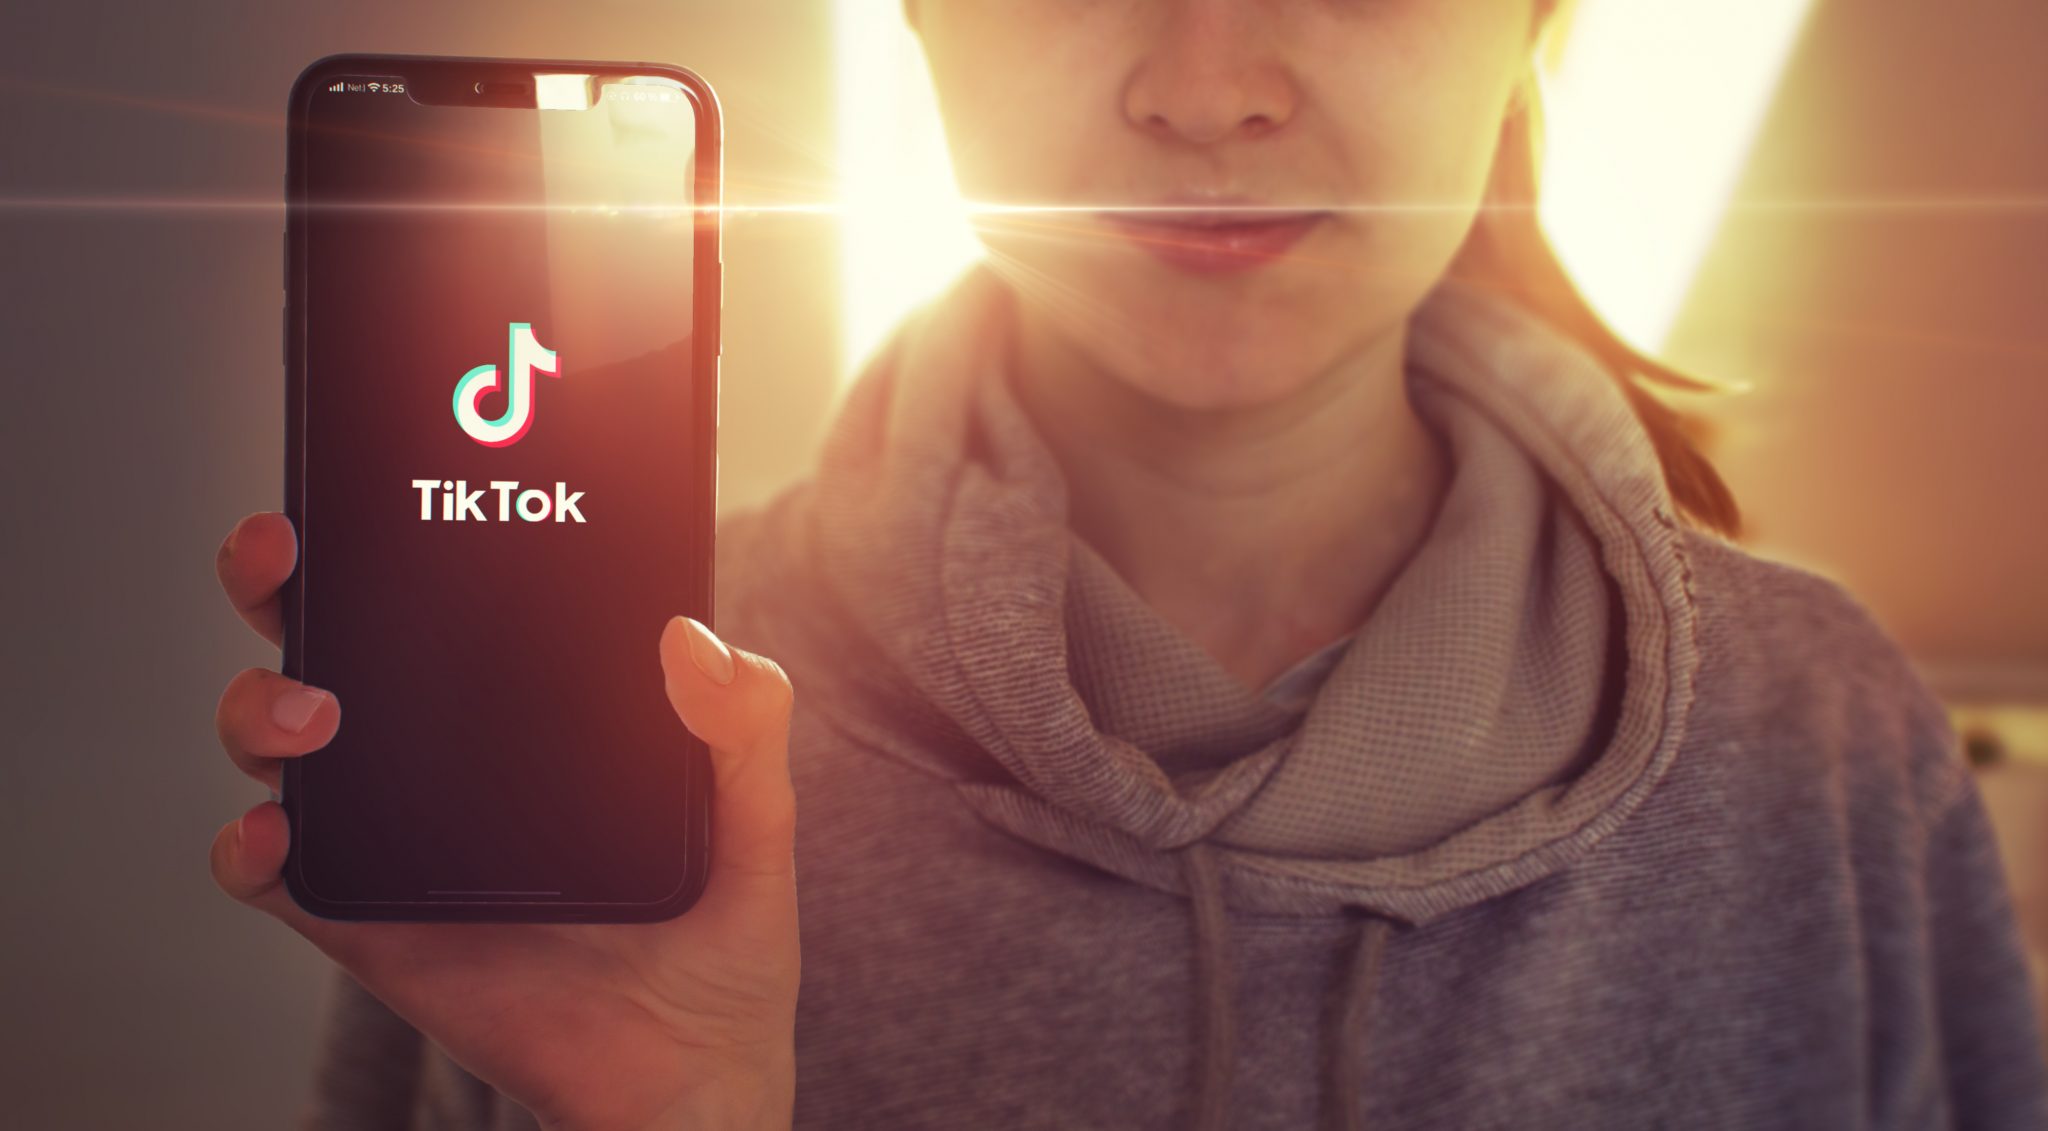 Young girl holding phone showing TikTok app